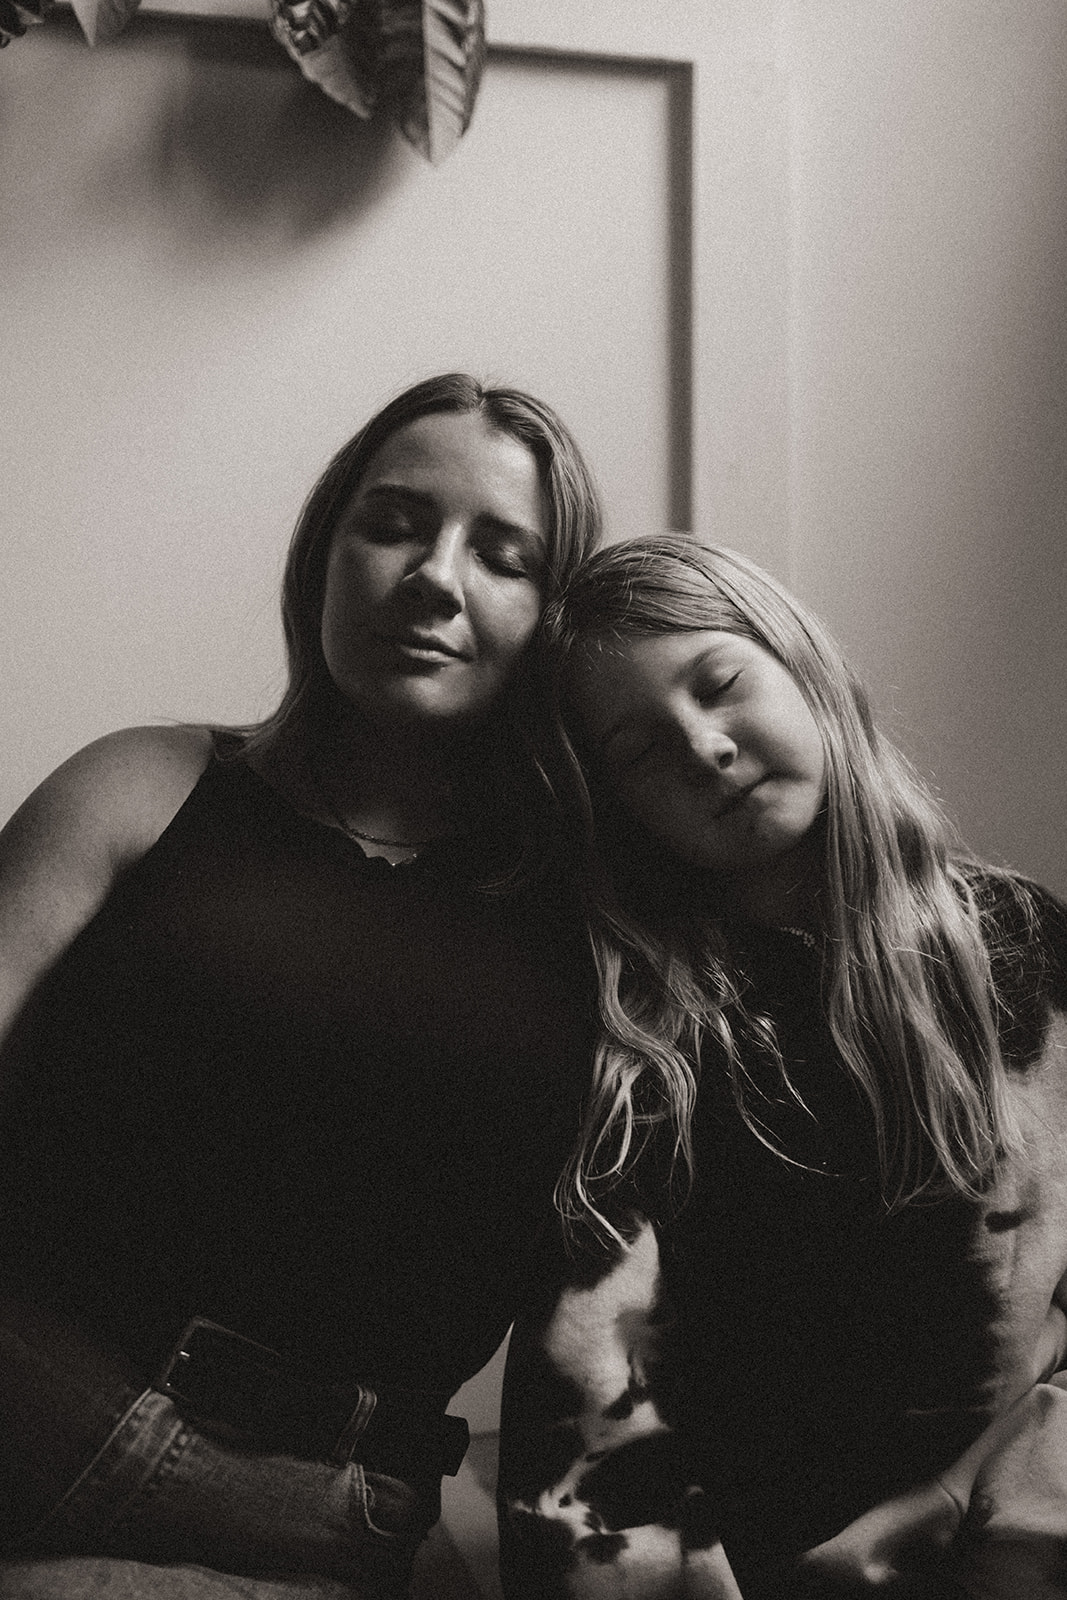 Photographer Chelsea Brown poses with her young daughter in this stunning black and white portrait